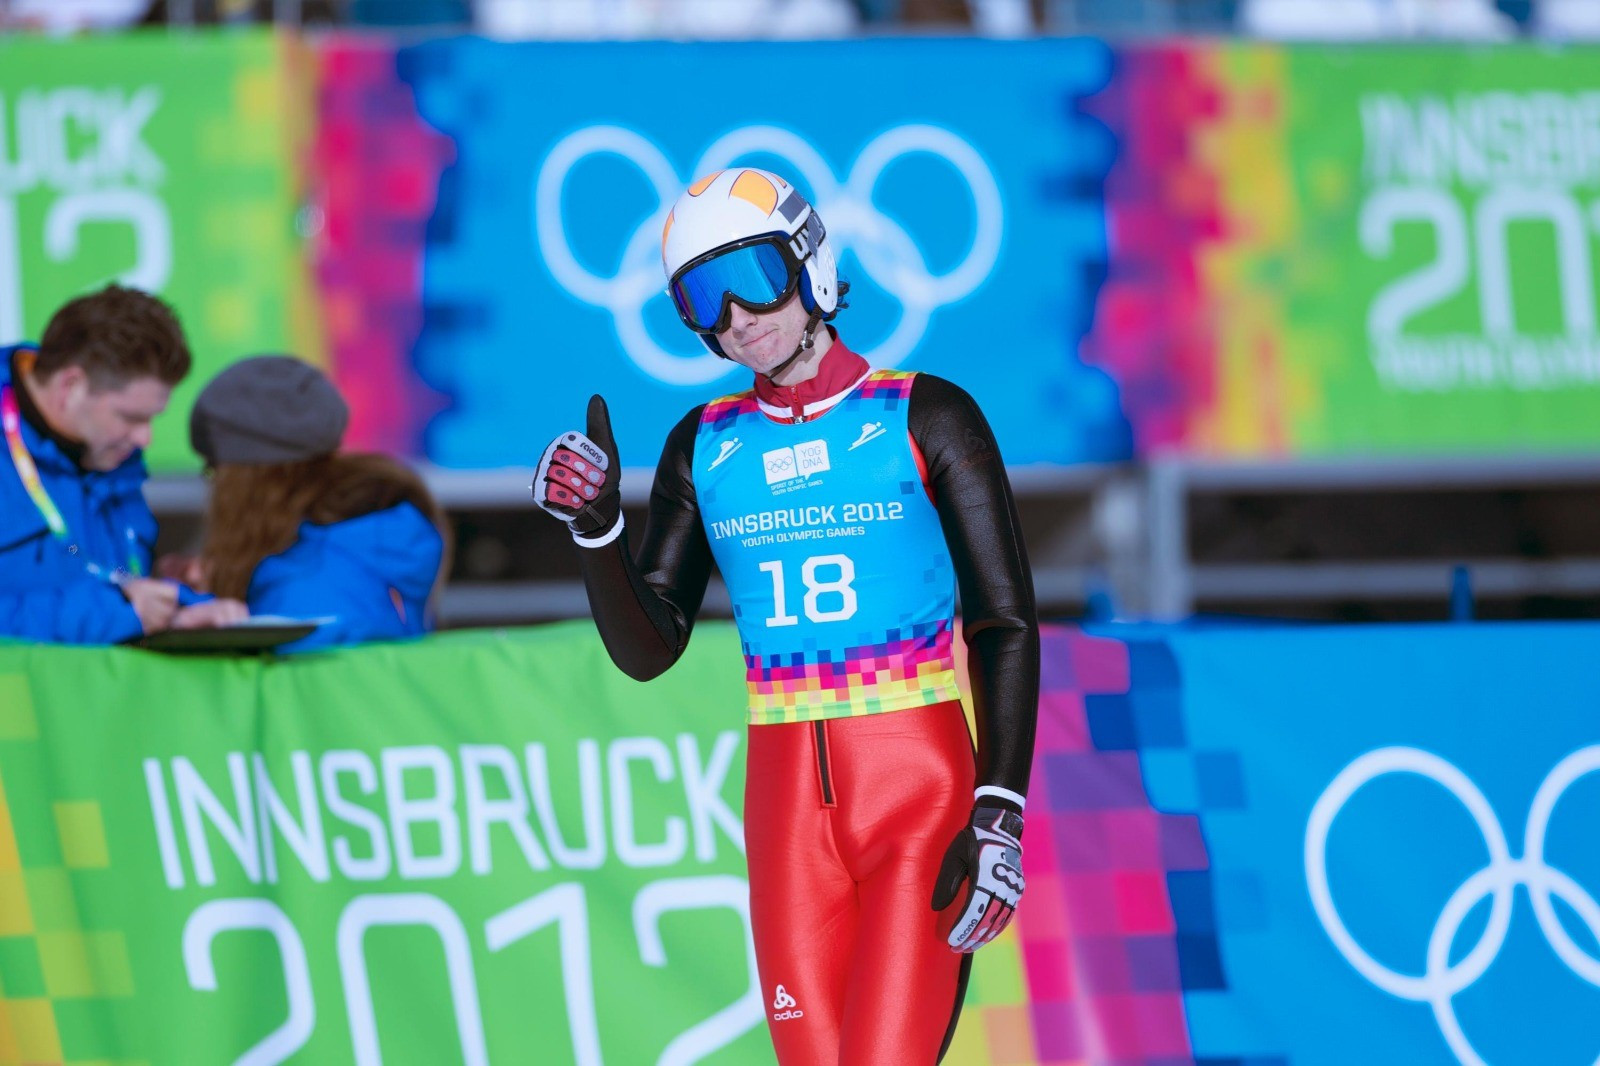 Killian Peier competed at the 2012 Winter Youth Olympics in Innsbruck ©Lausanne 2020